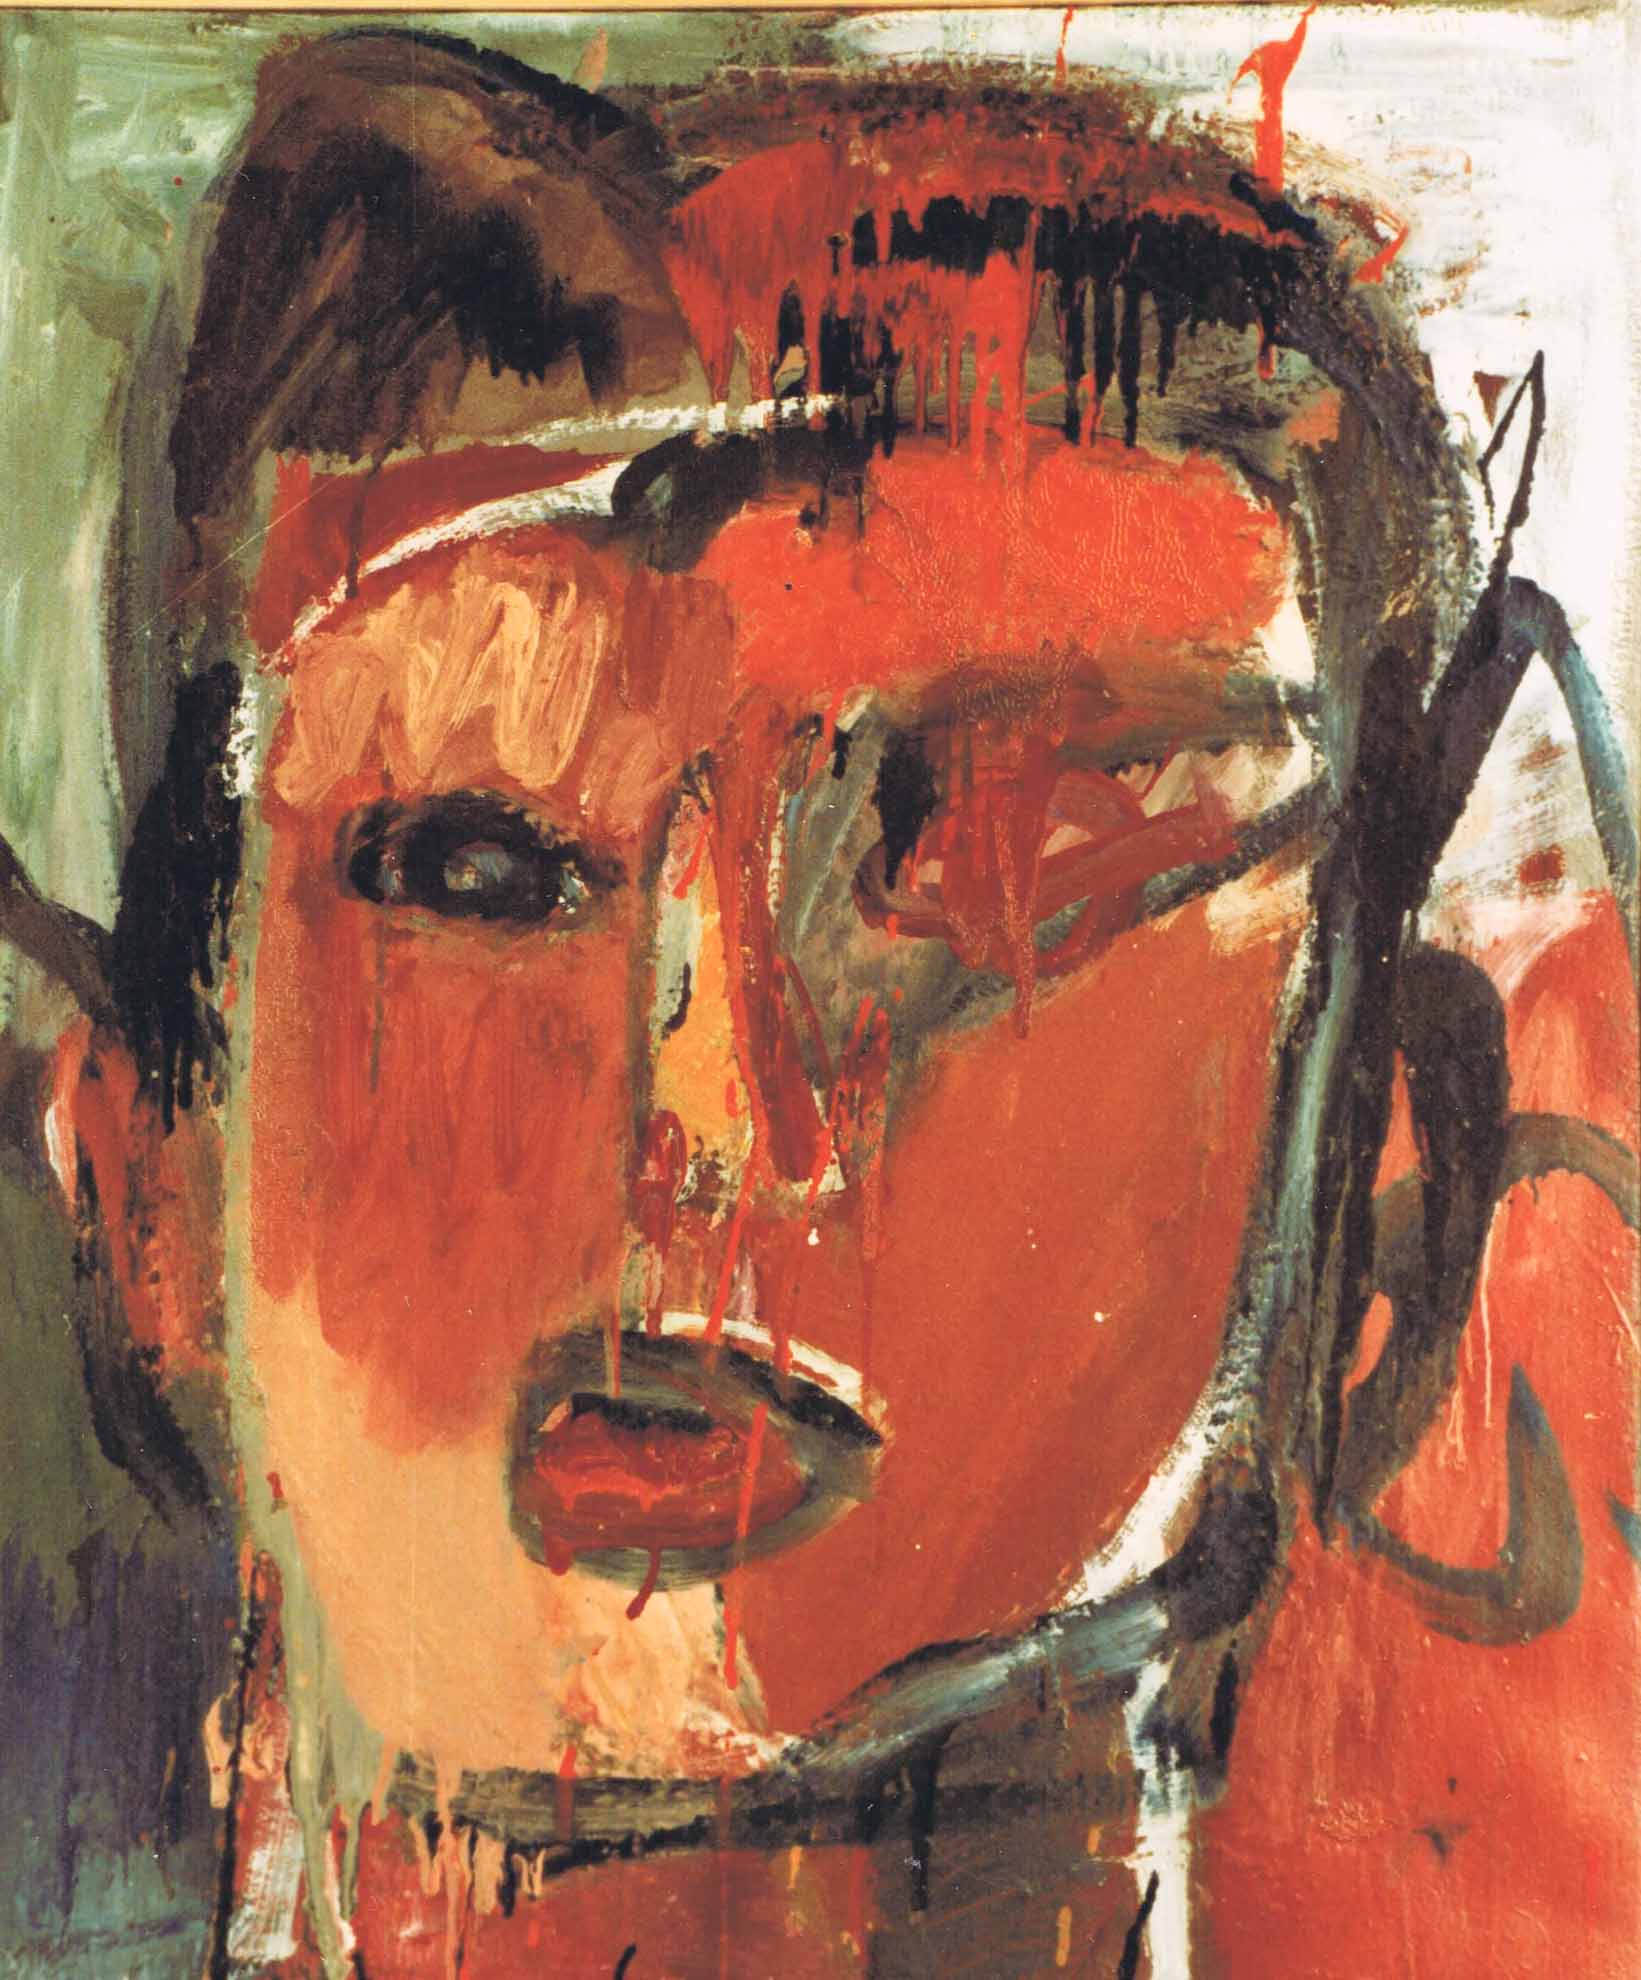 Head of a goddess1982, Oil on paper on canvas, 60 x 50 cm